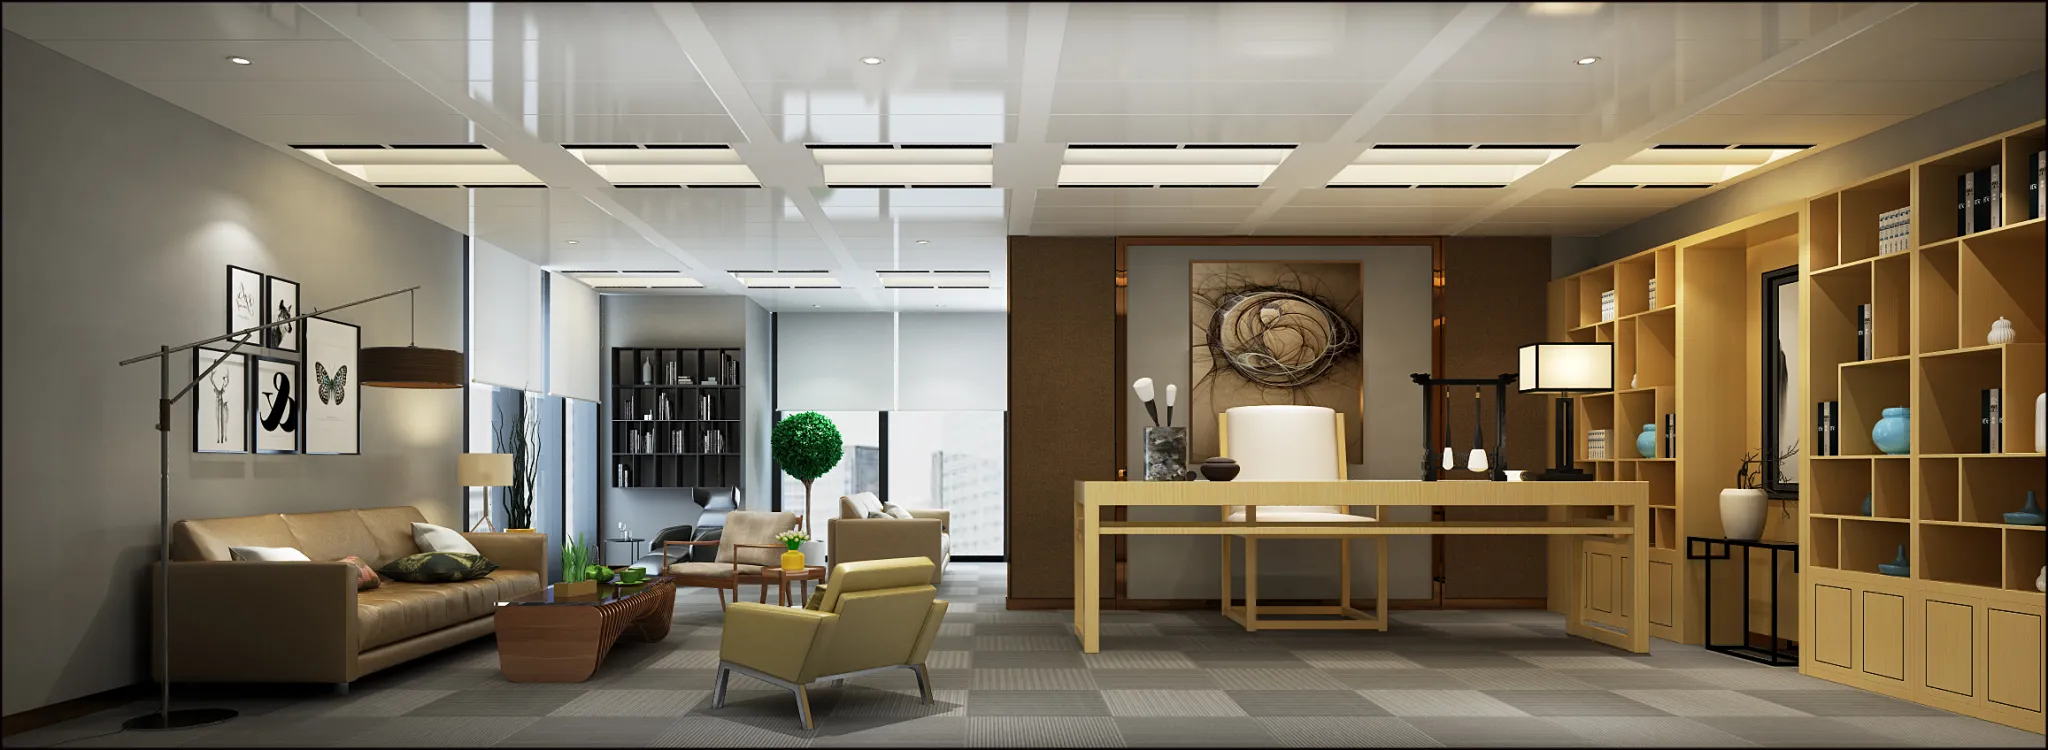 3D OFFICE INTERIOR (VRAY) – MANAGER ROOM 3D SCENES – 088